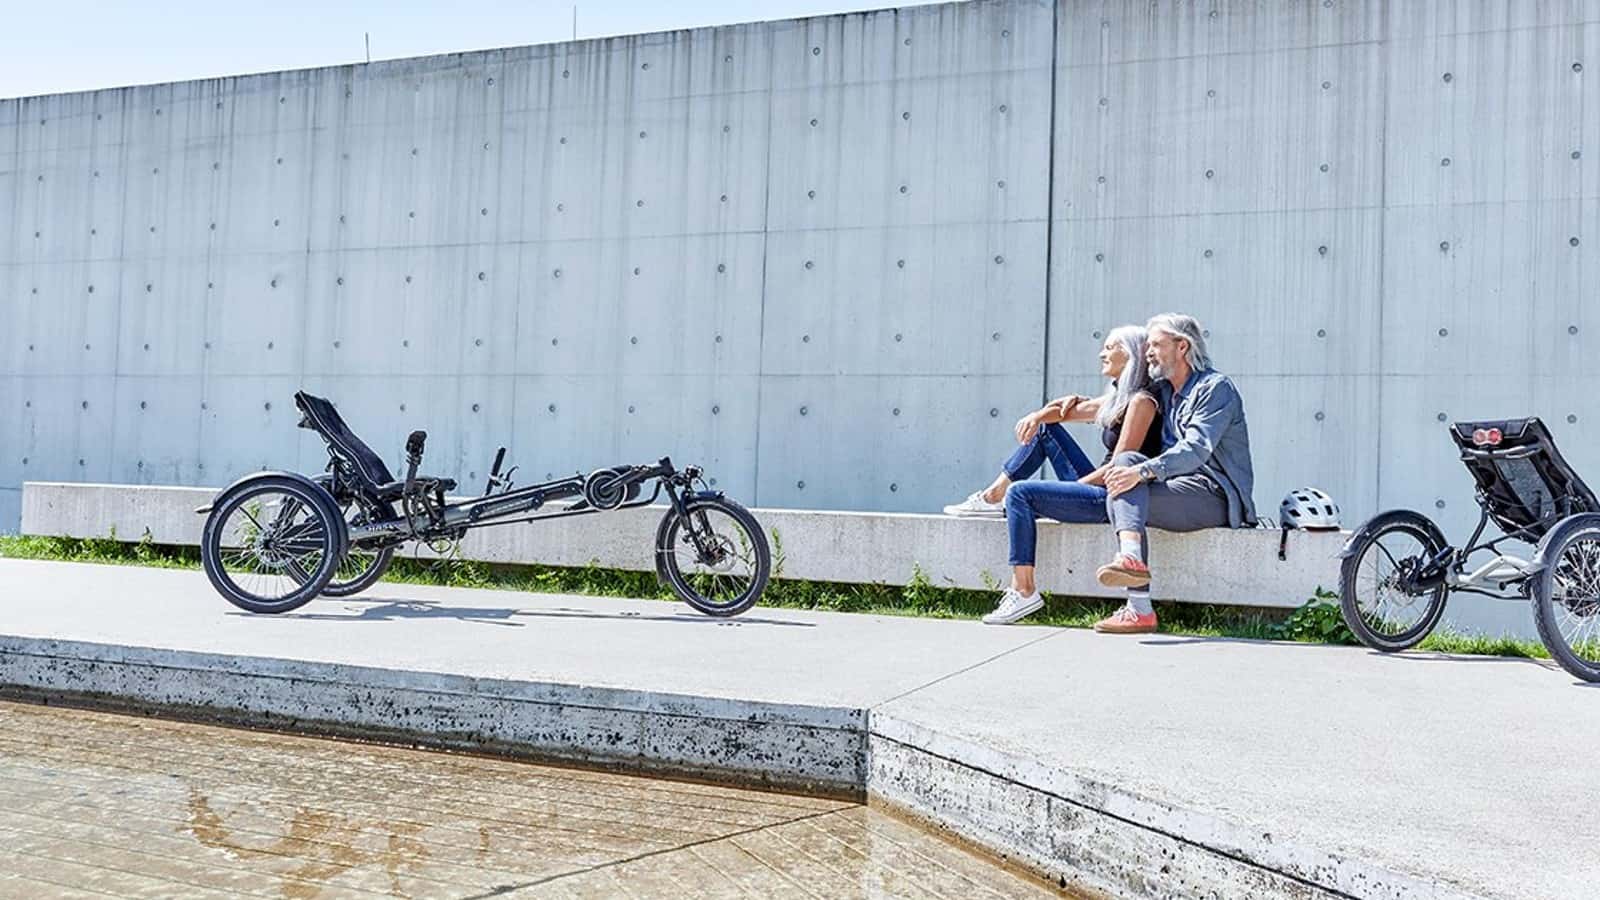 Motor-assist helps recumbent riders to get going from standstill